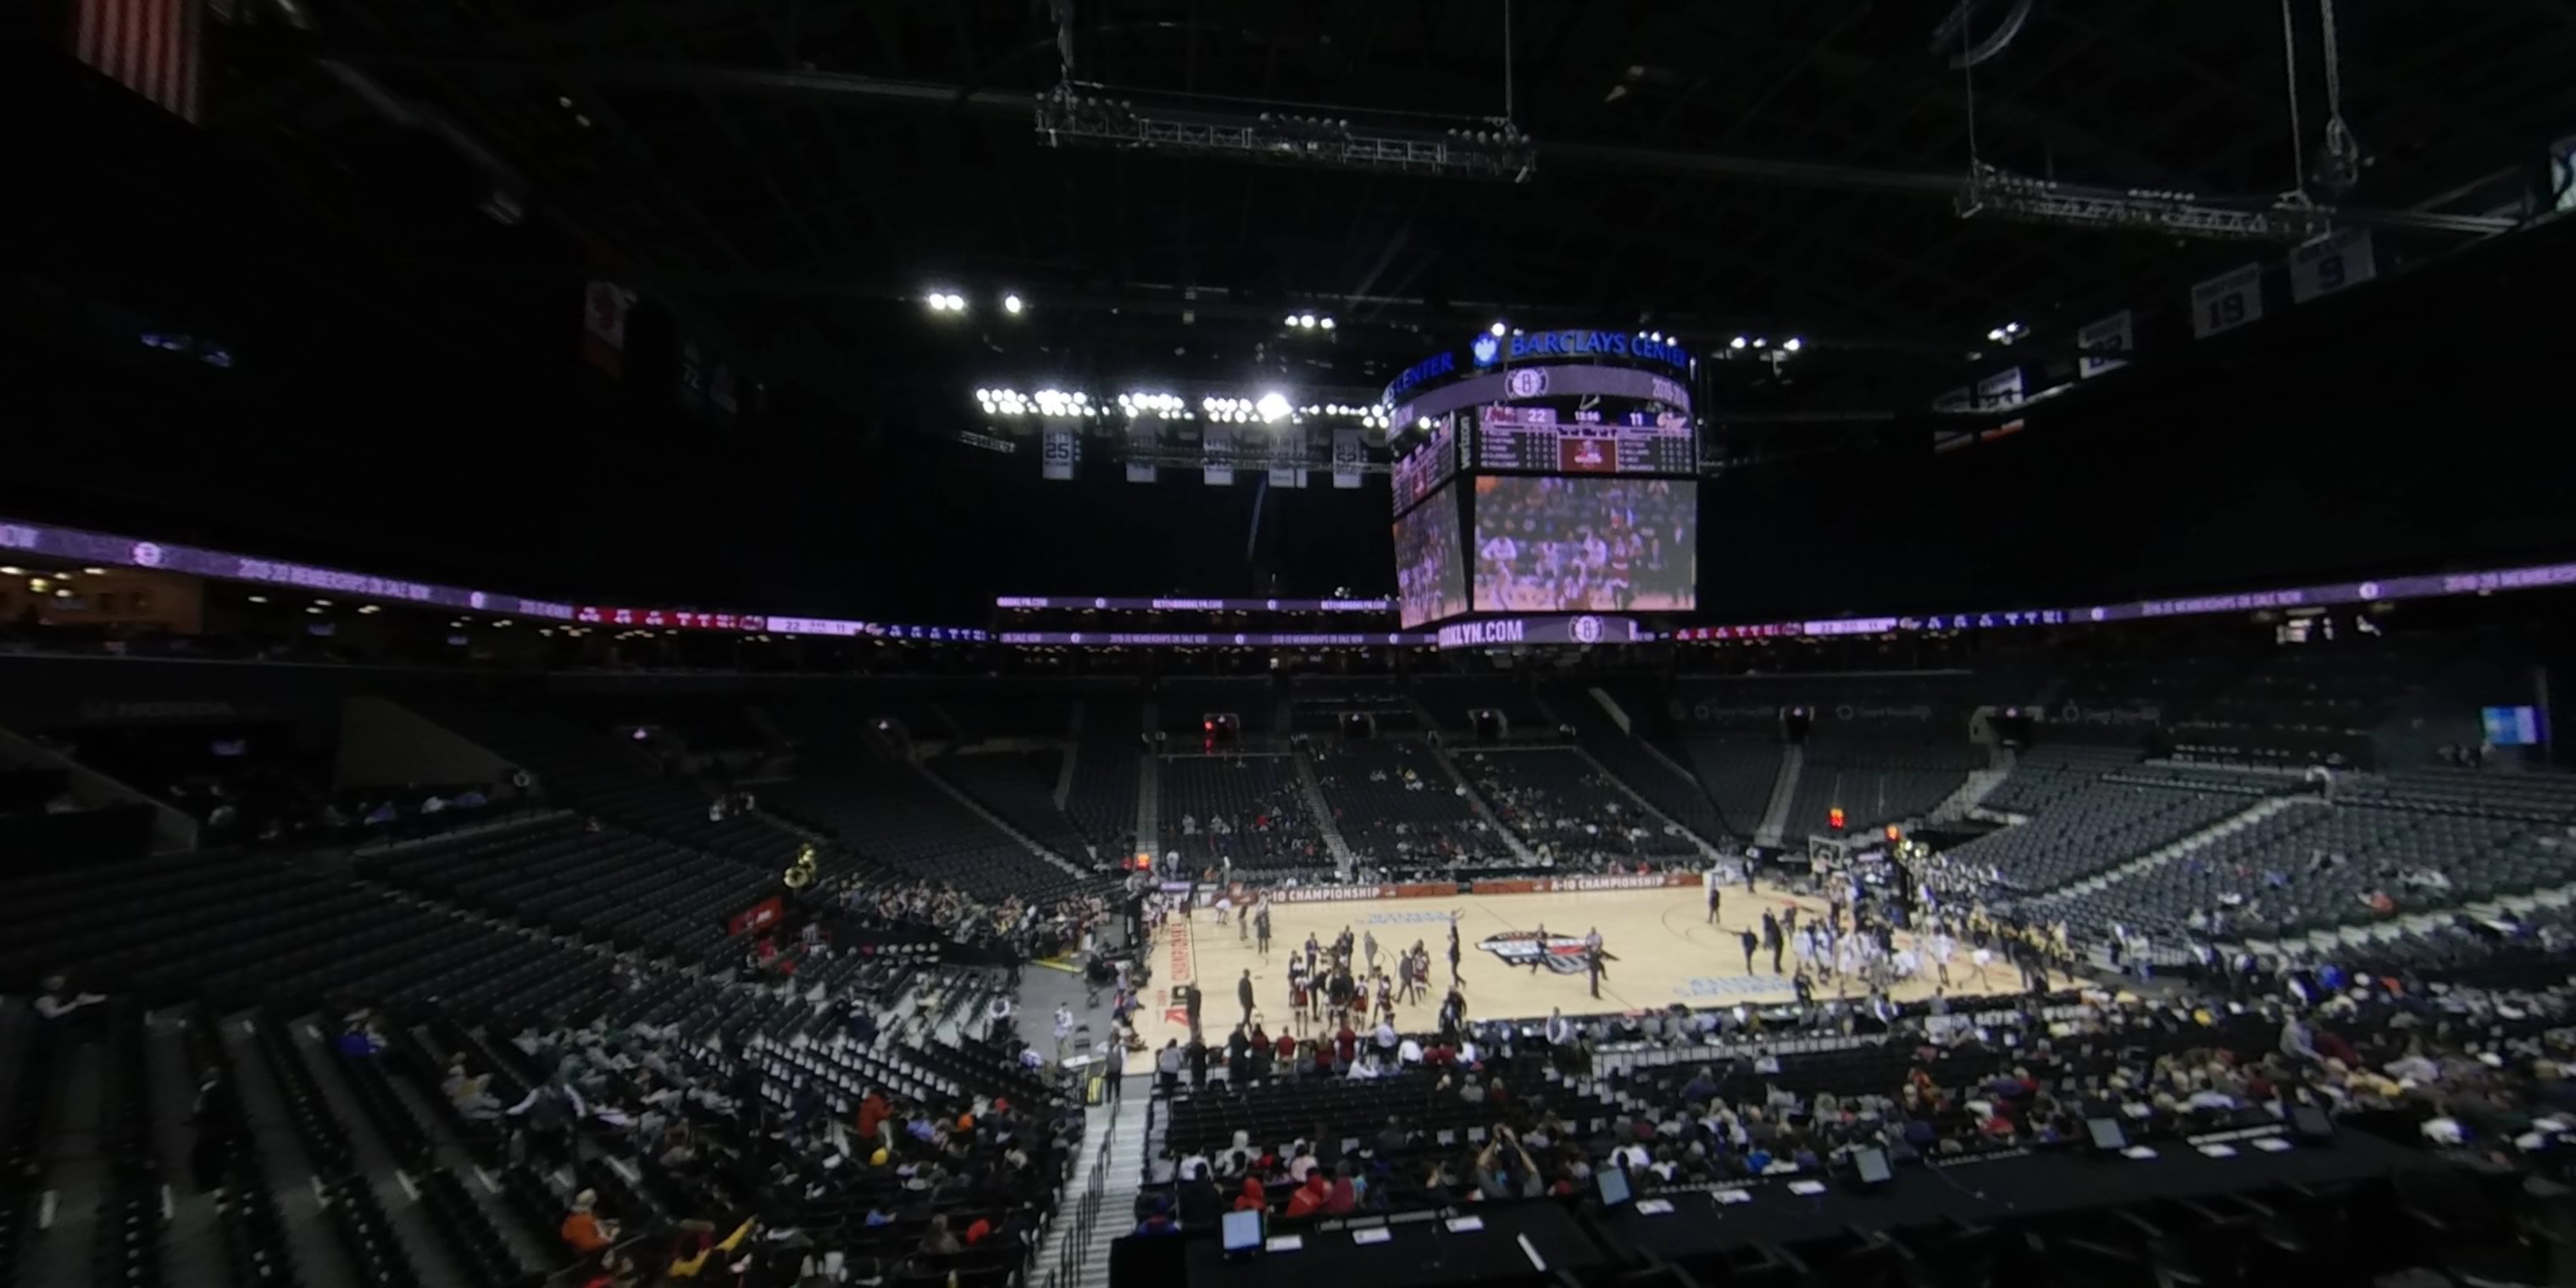 section 109 panoramic seat view  for basketball - barclays center